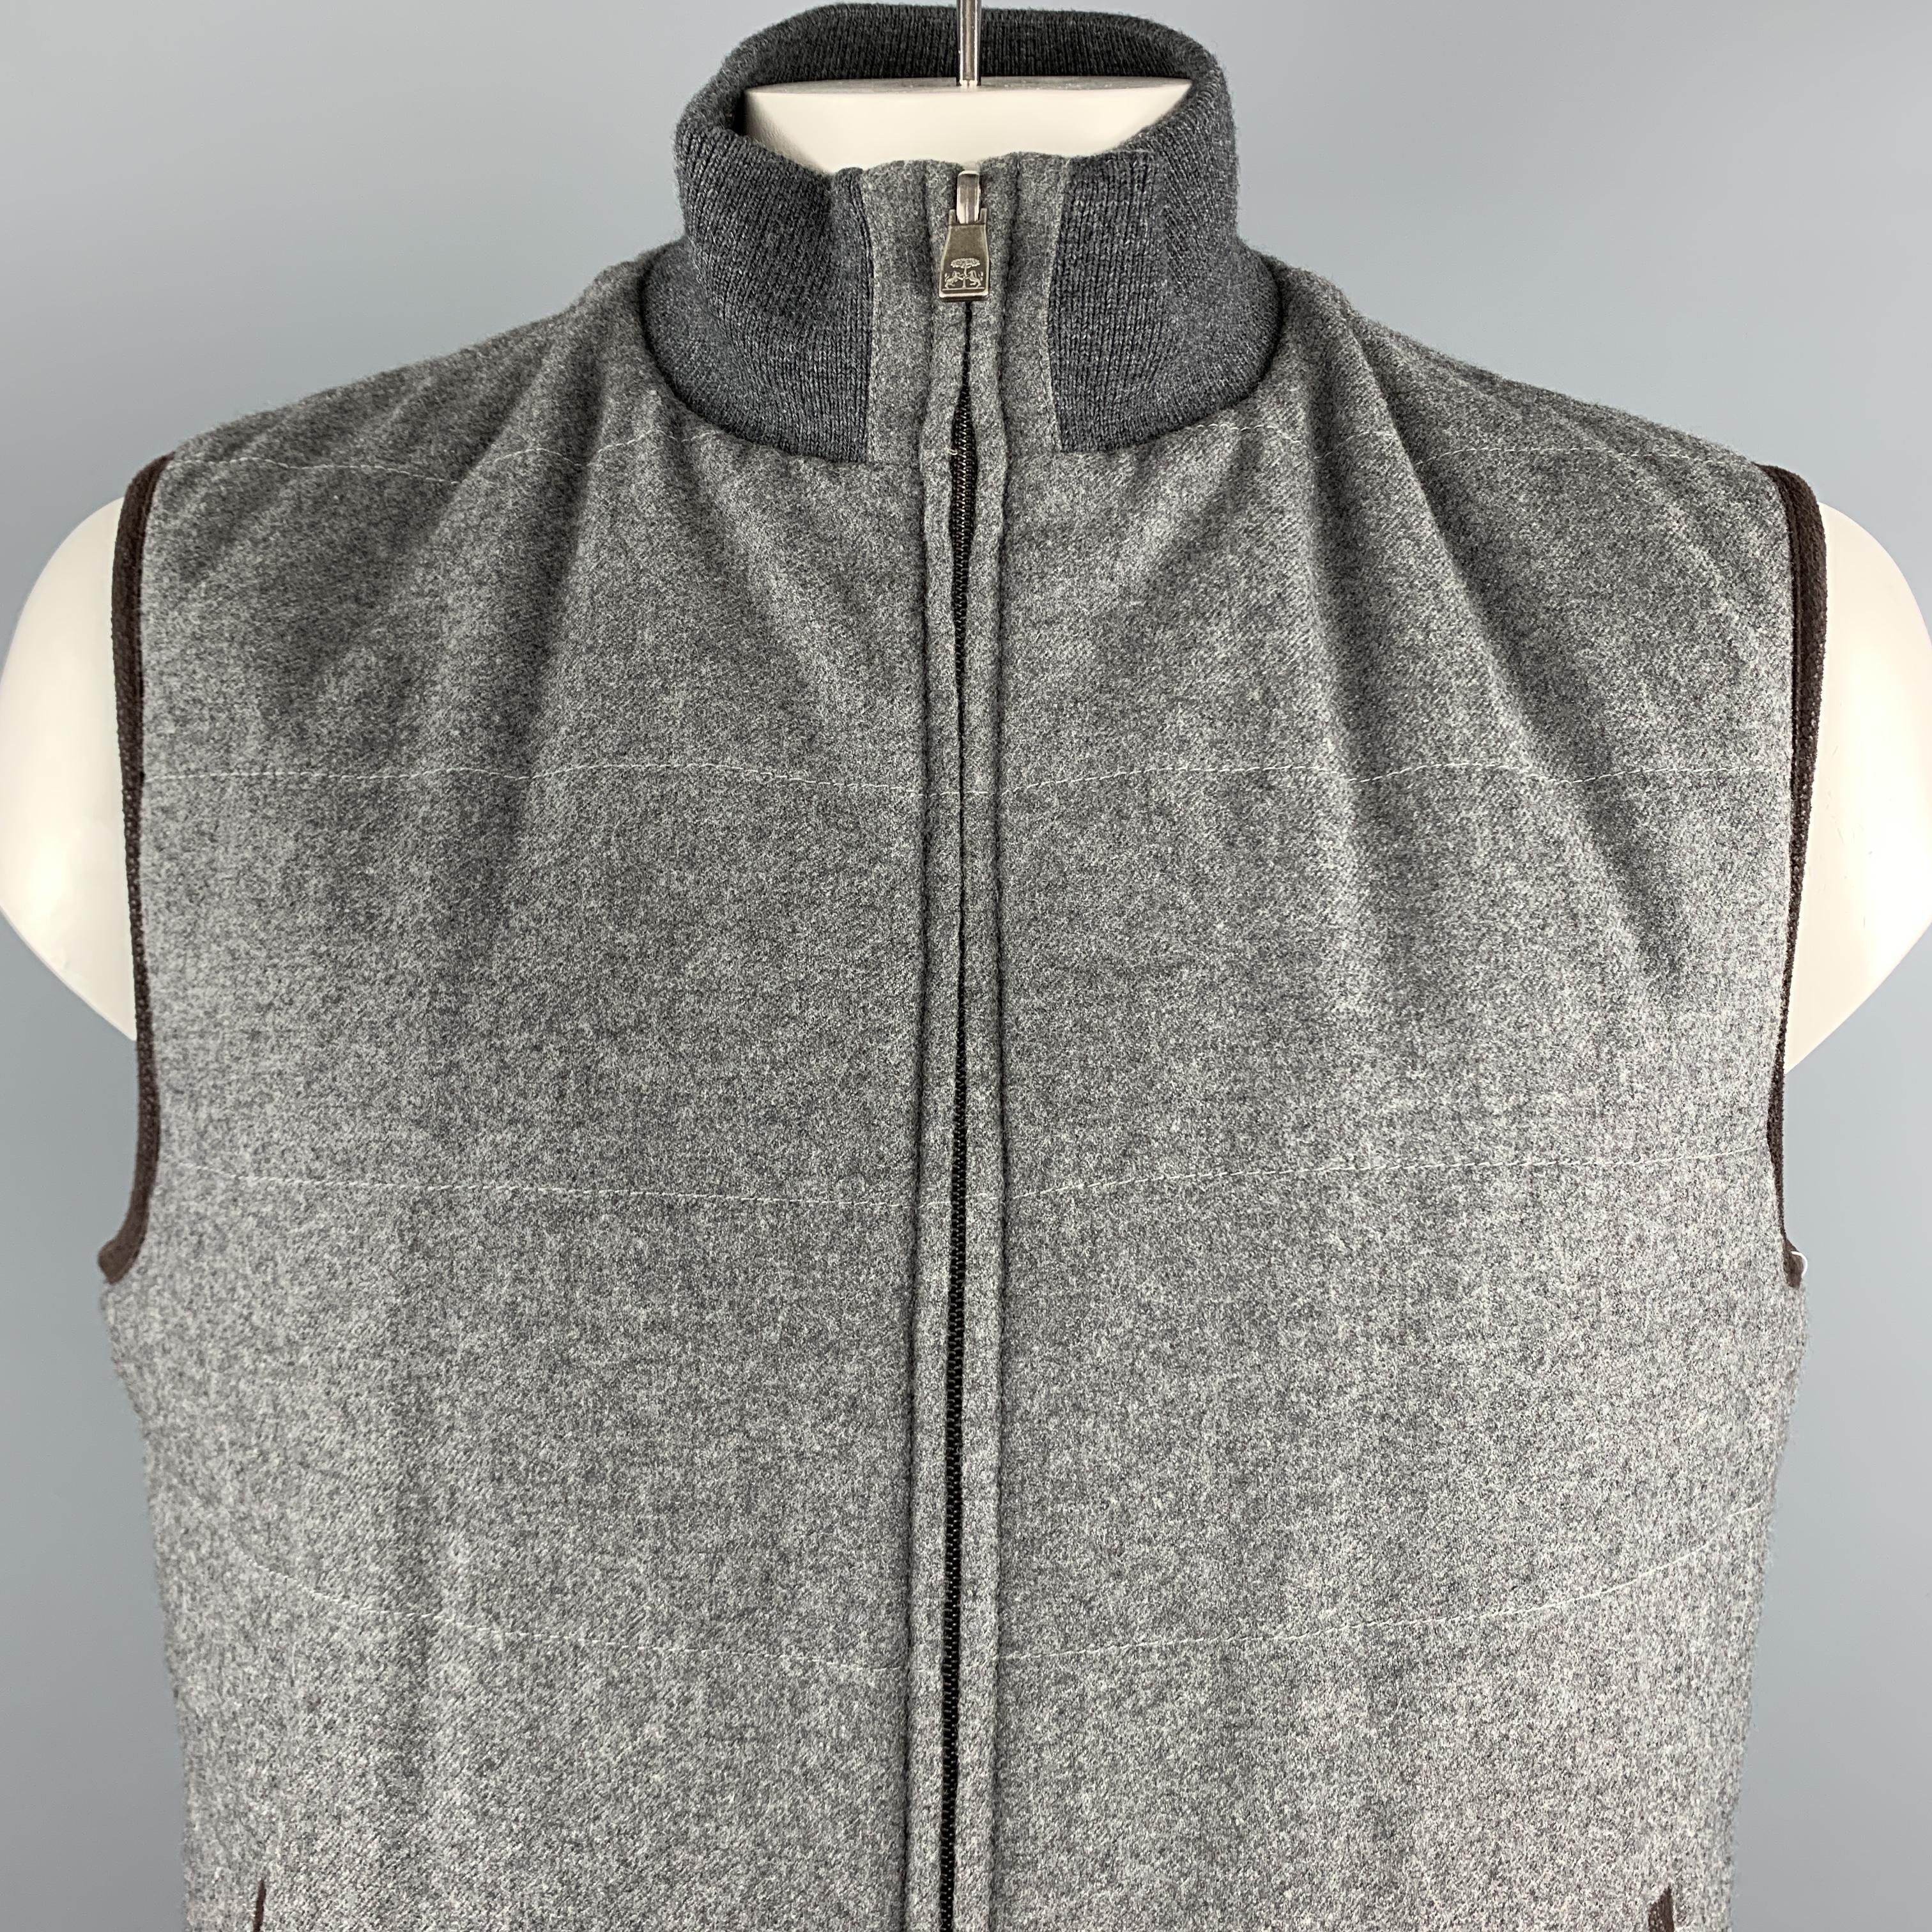 CORNELIANI Reversible vest comes in a gray quilted virgin wool material, with a high collar, a ribbed grey trim, a zipped front, and zip pockets. Made in Italy. 

Excellent Pre-Owned Condition.
Marked: 54 R

Measurements:

Shoulder: 18 in. 
Chest: